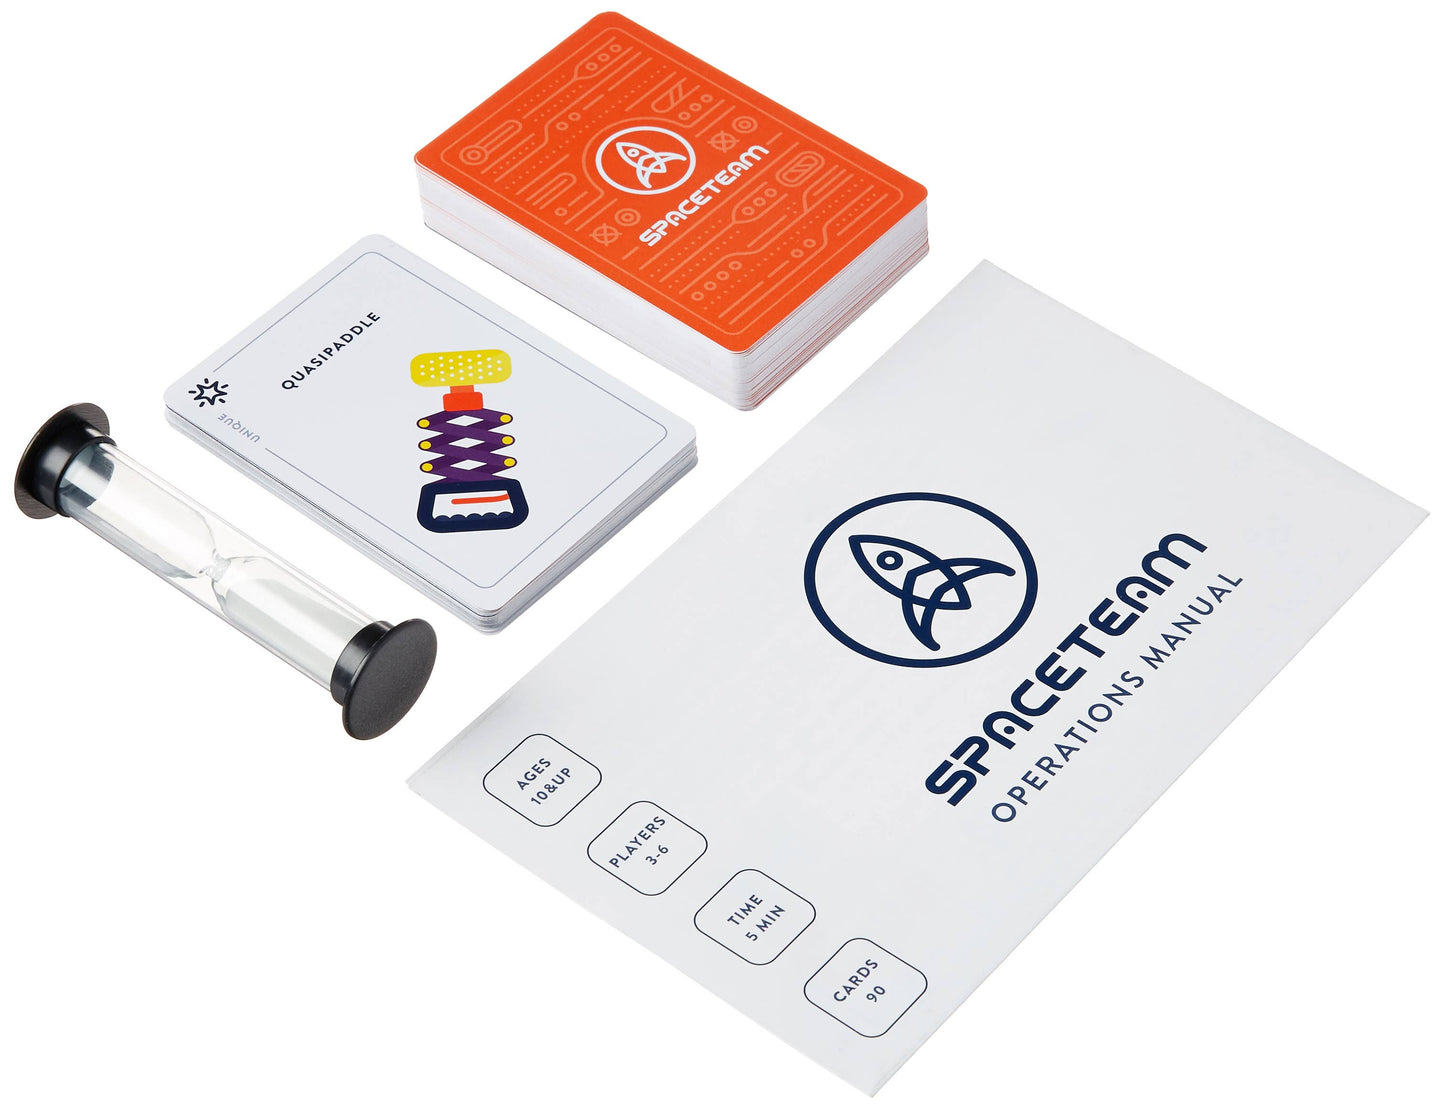 Spaceteam: A Chaotic & Cooperative Card Game